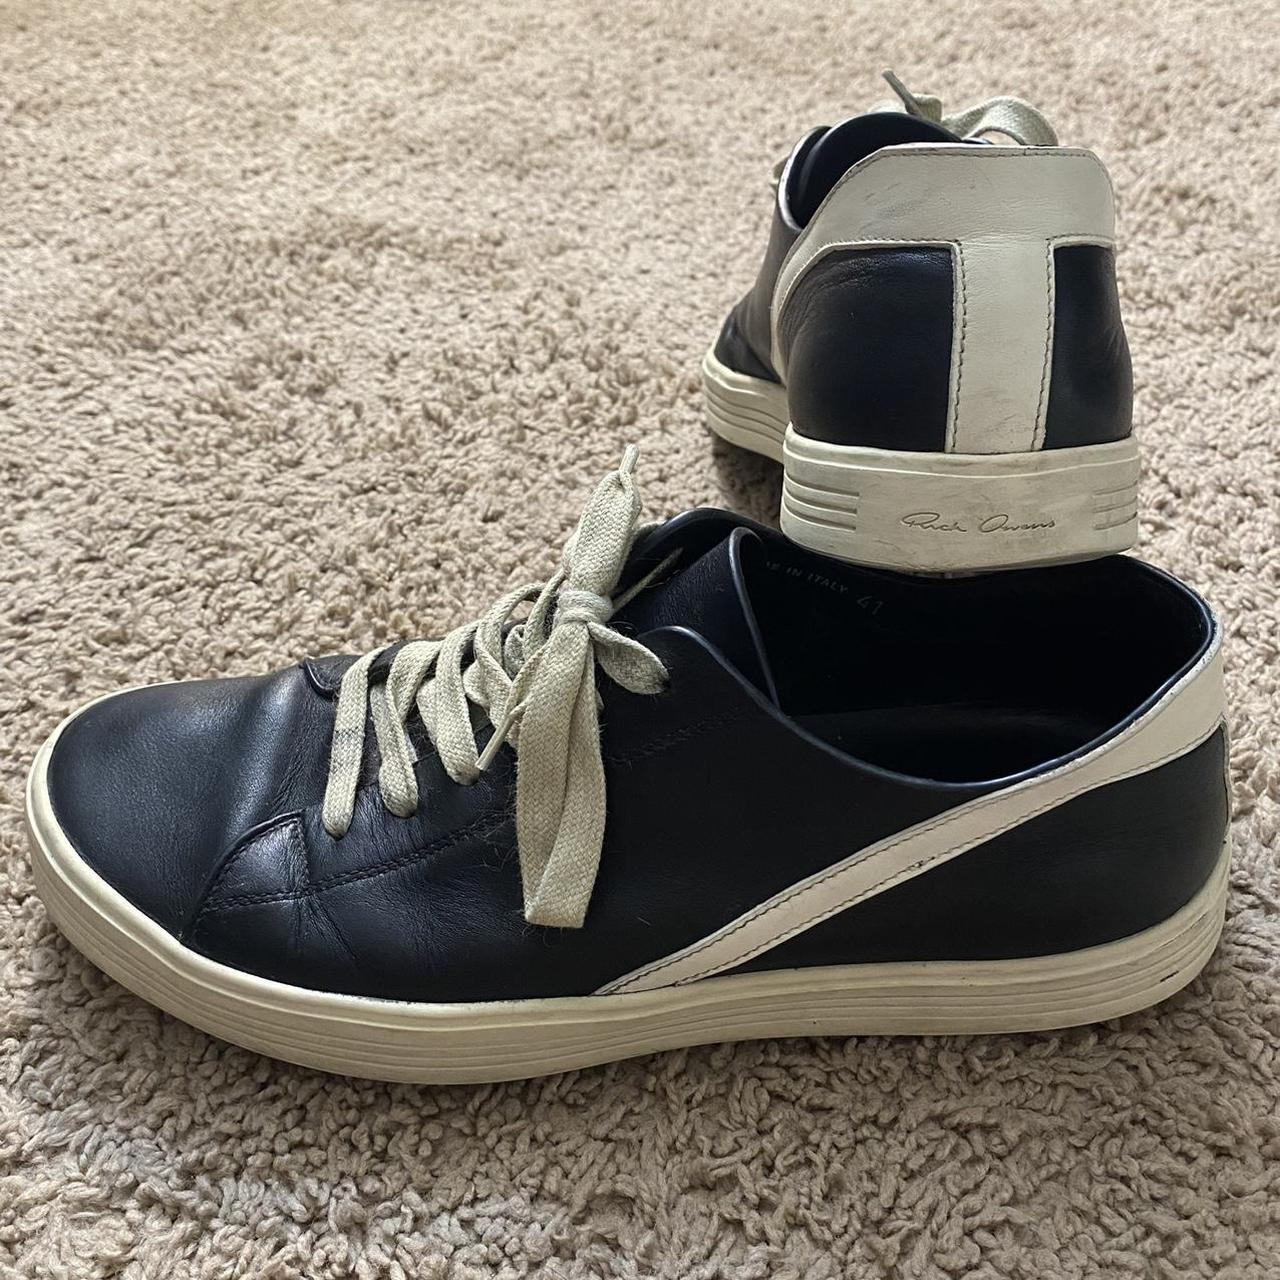 Rick Owens geothrasher low shoes in black and cream... - Depop